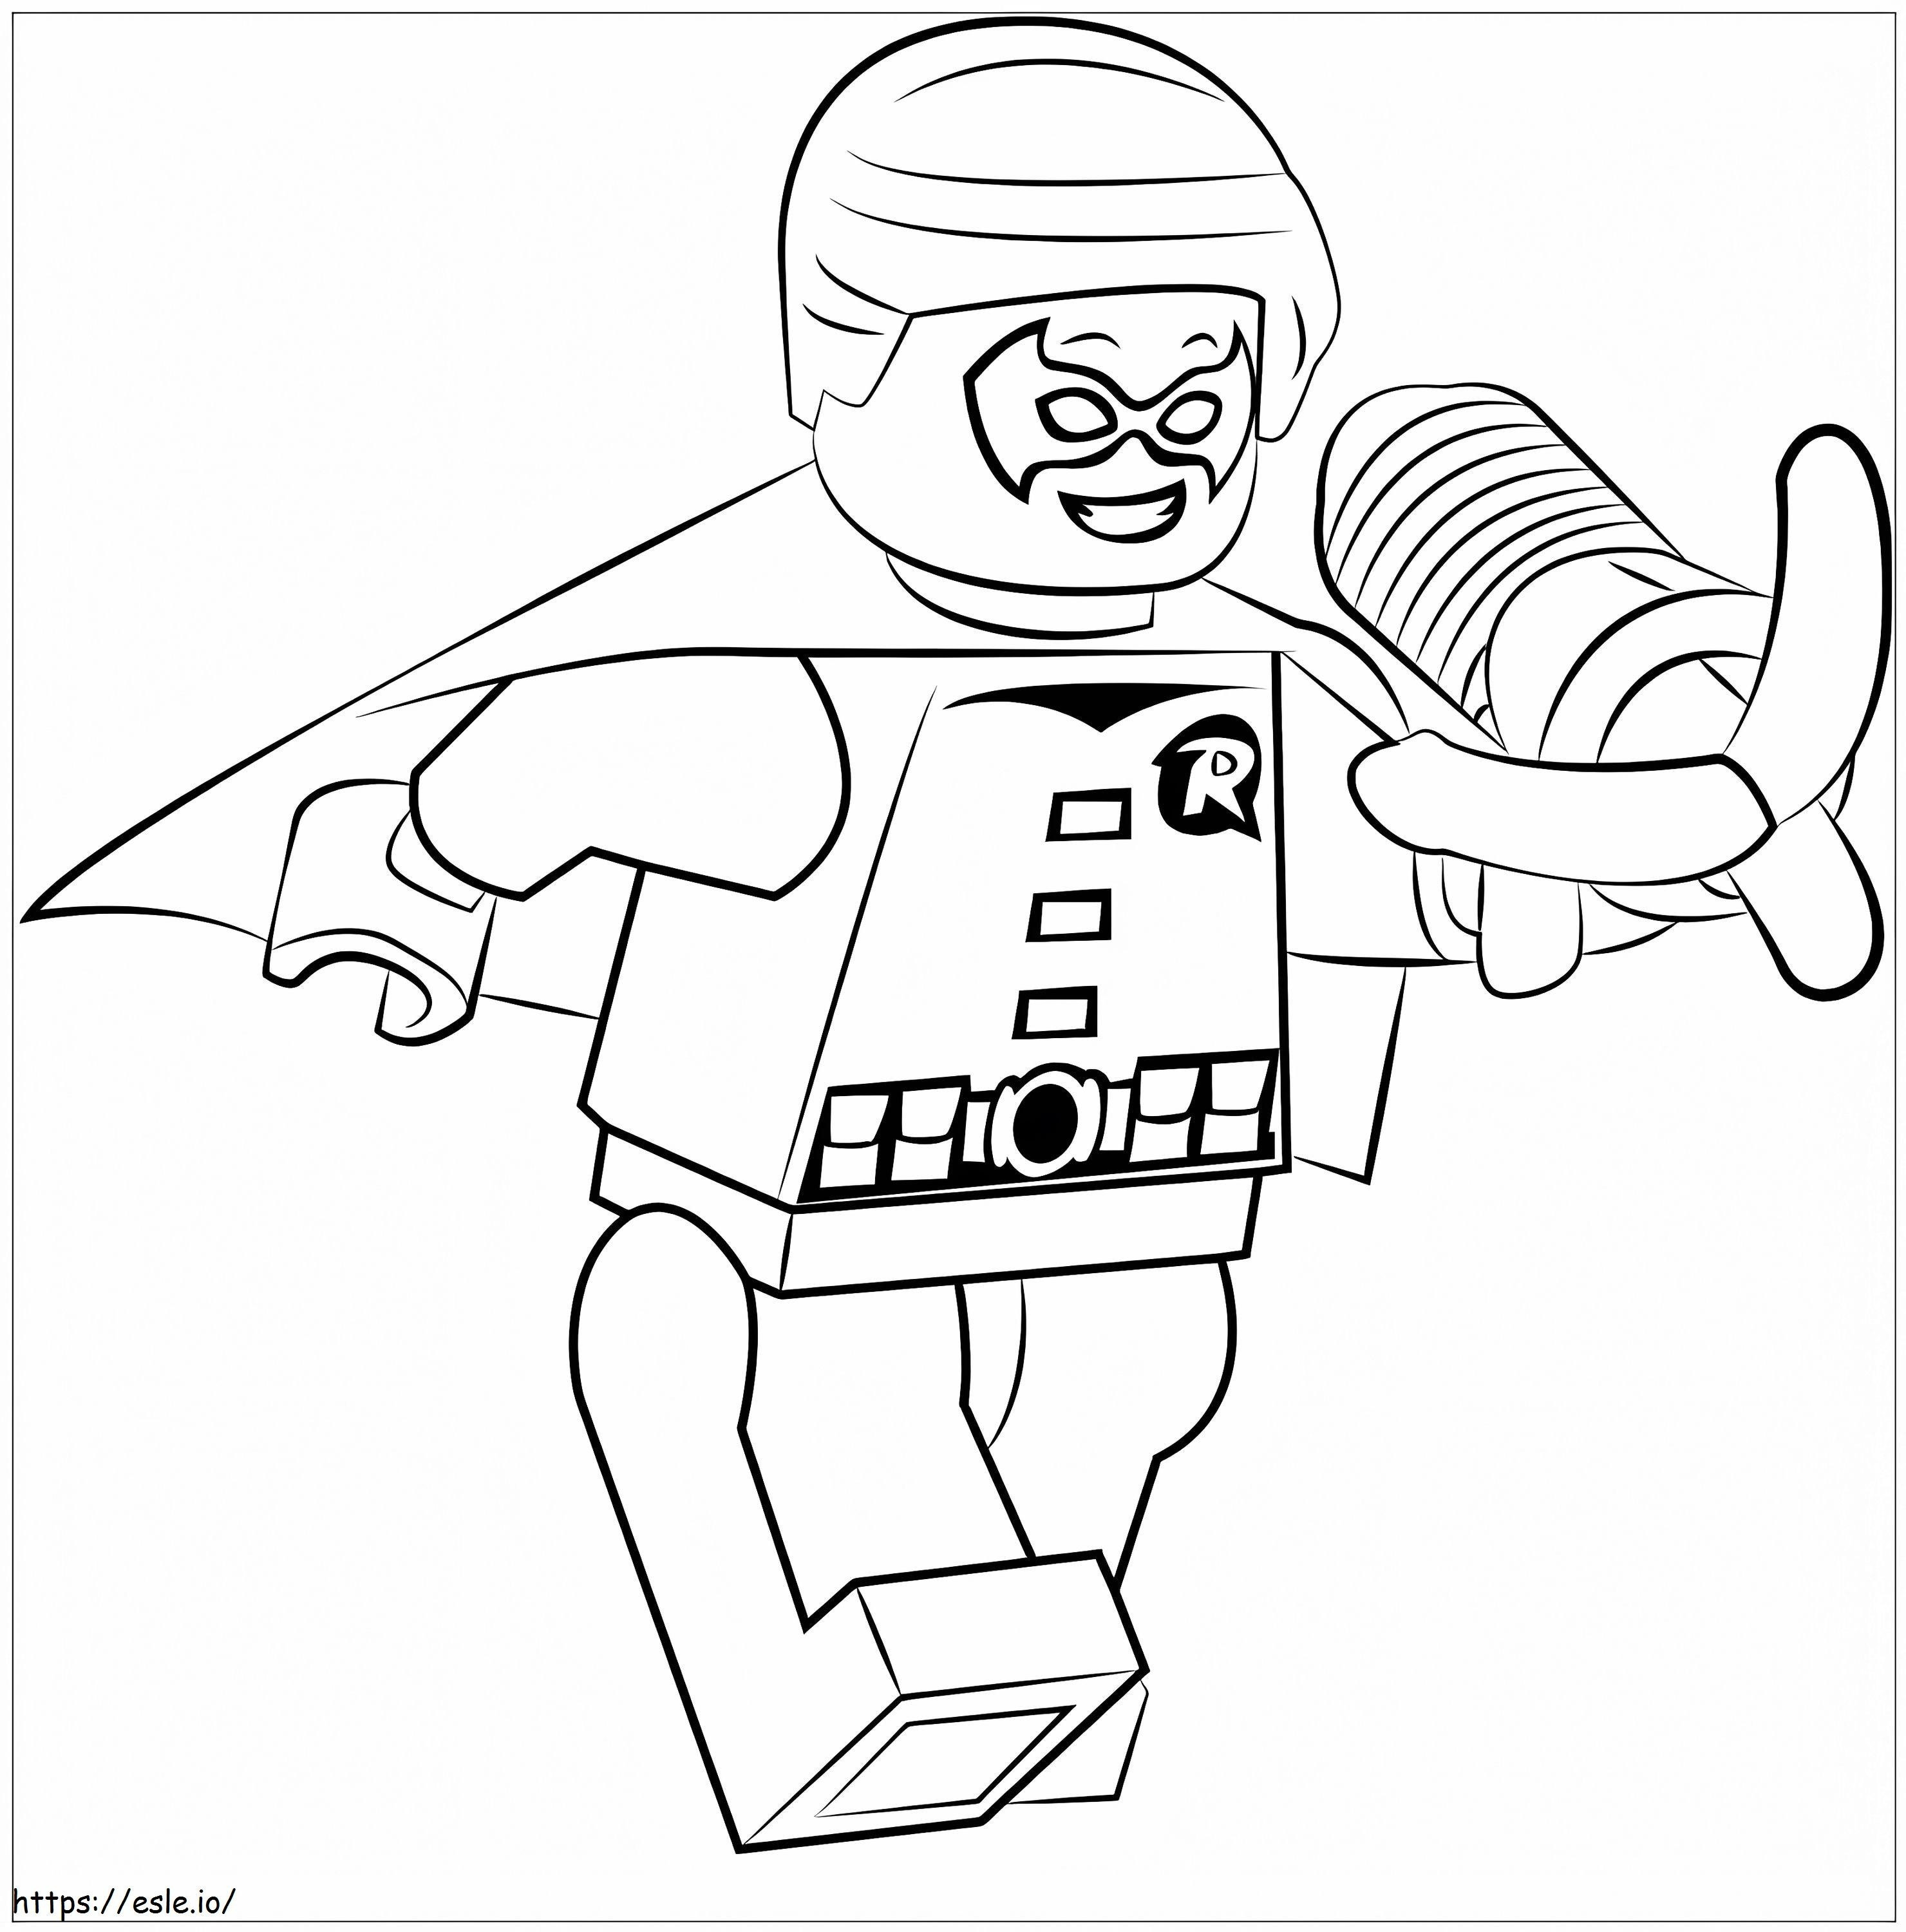 Action Lego Robin 1 coloring page